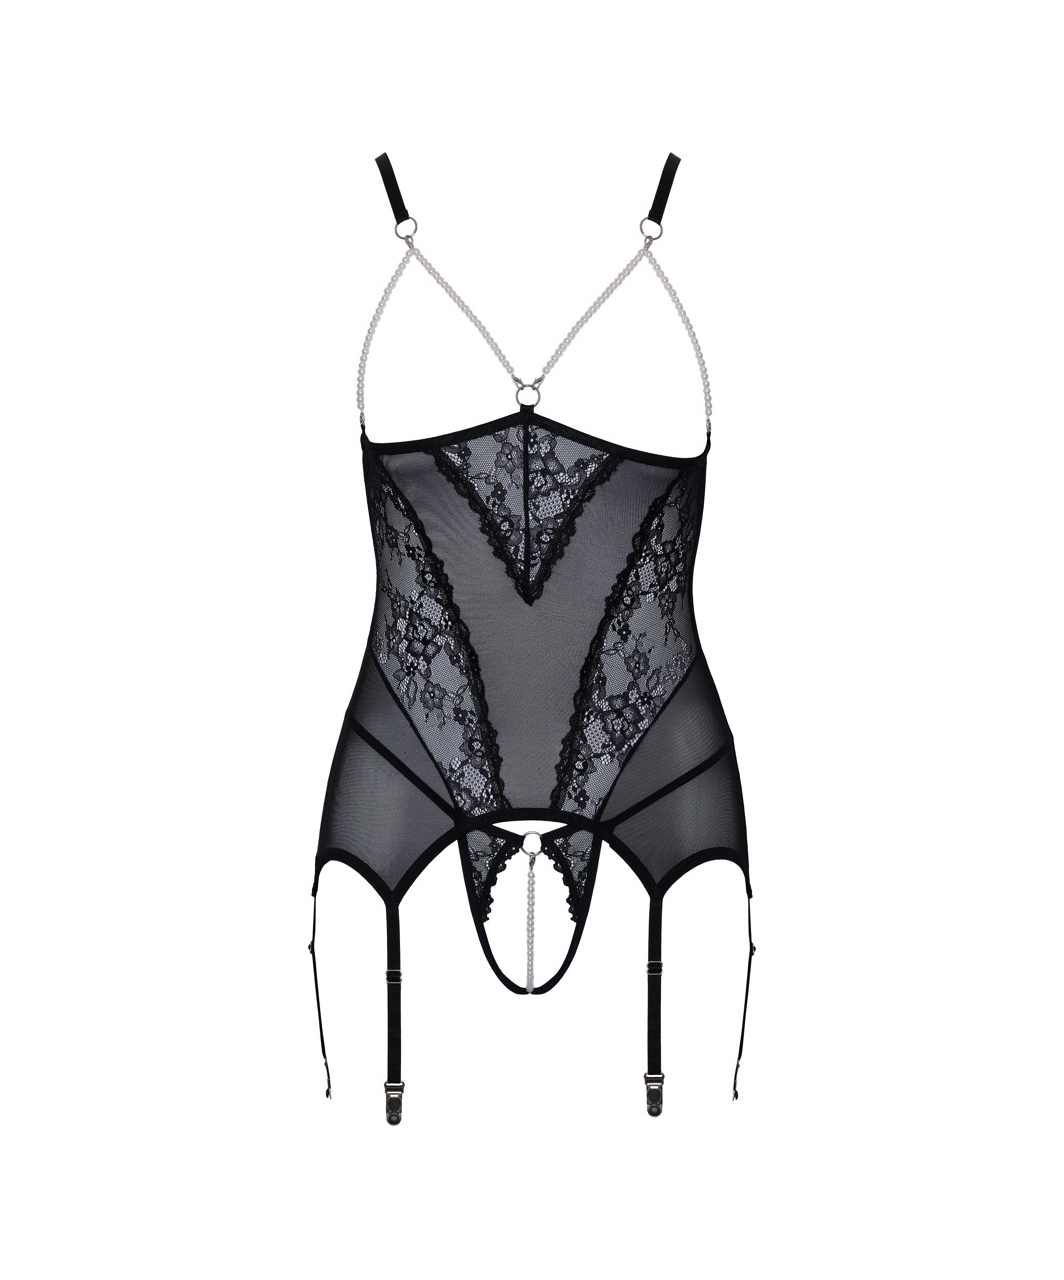 Cottelli Lingerie black open basque with pearls & string